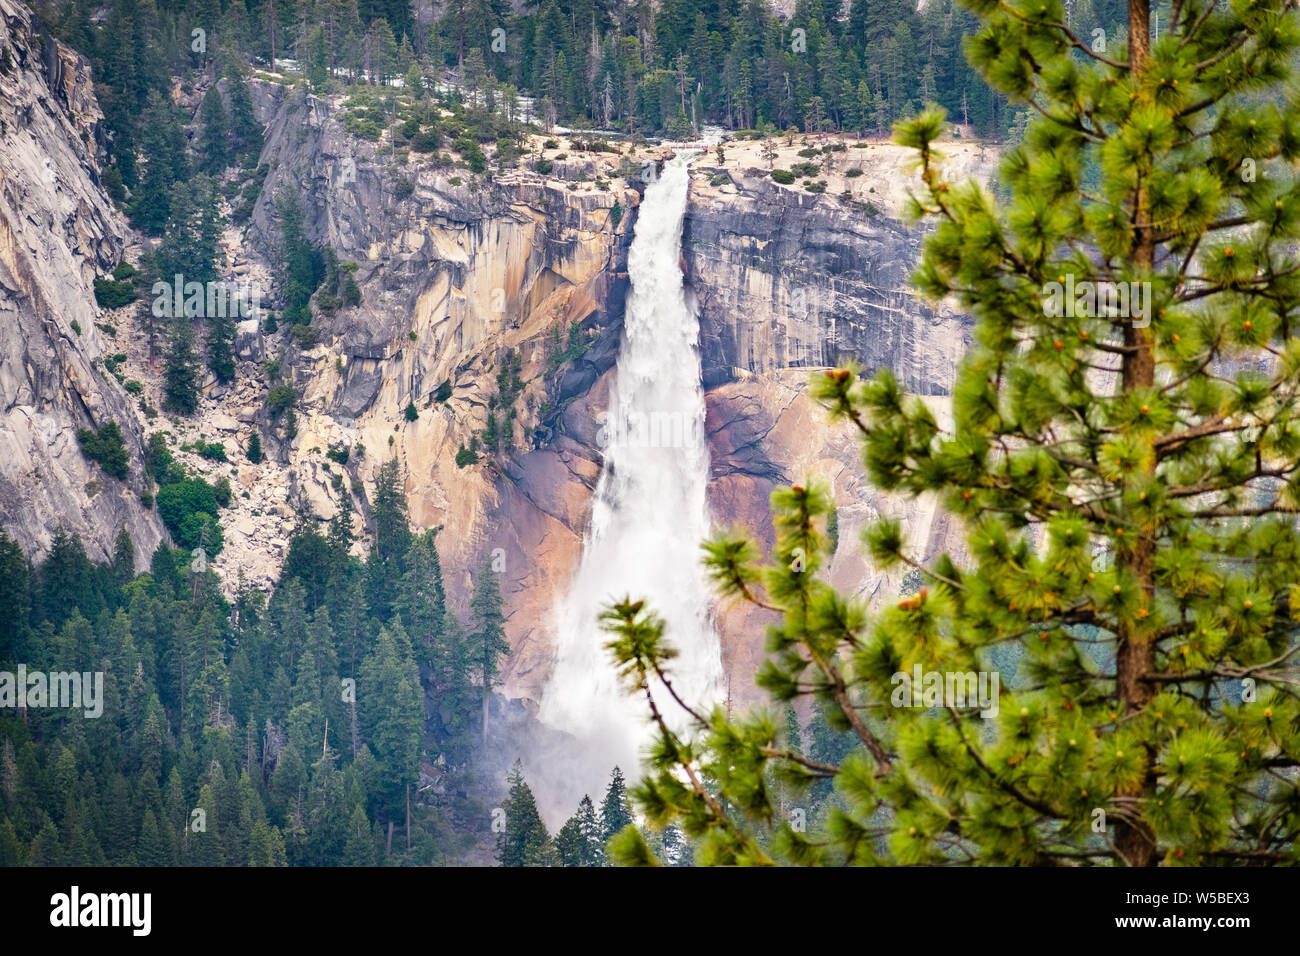 Aerial view of Nevada Fall, Yosemite National Park, Sierra Nevada mountains, California; People visible on the hiking trail on the left and above the Stock Photo